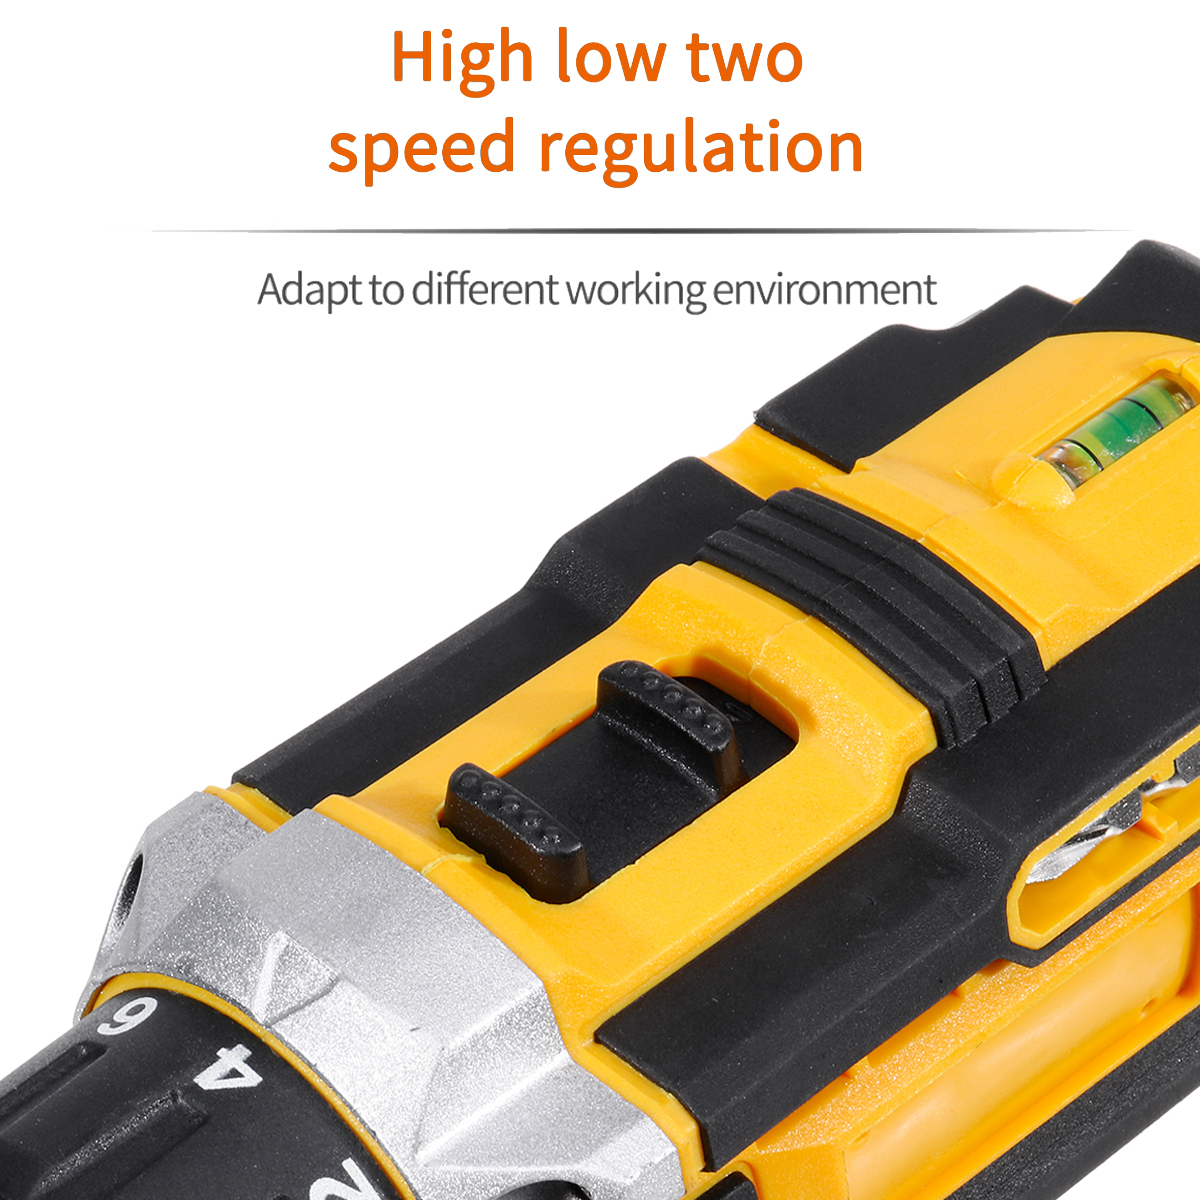 2000rpm-38Nm-21V-Lithium-Electric-Impact-Hammer-Drill-Wood-Drilling-Screwdrivers-with-Battery-1943471-10